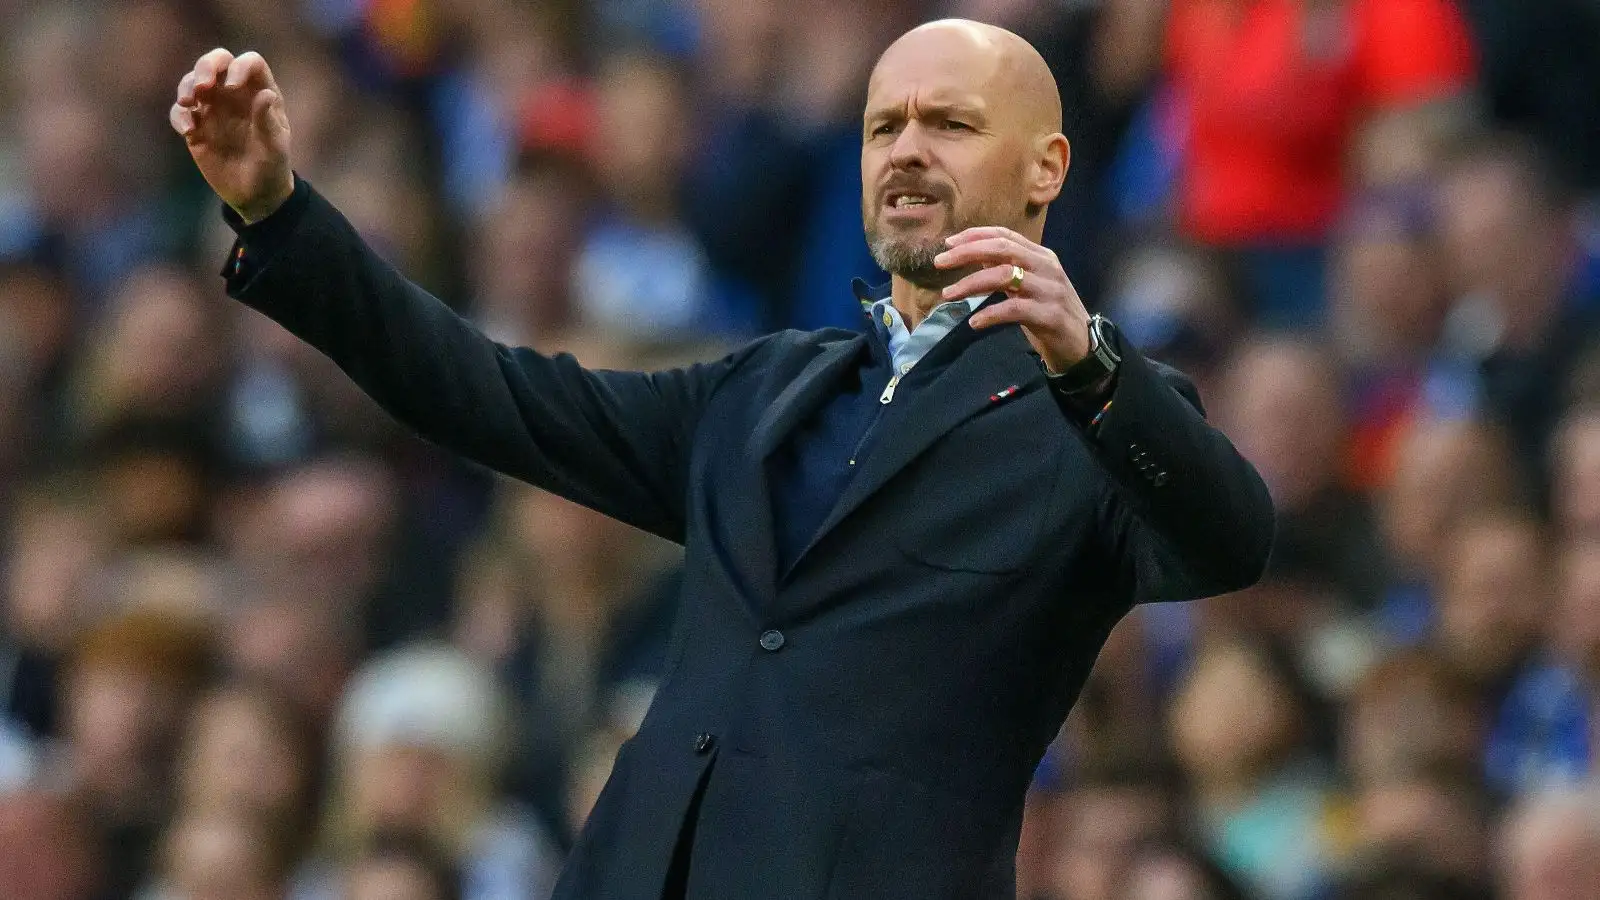 Erik ten Hag looks frustrated during a match.